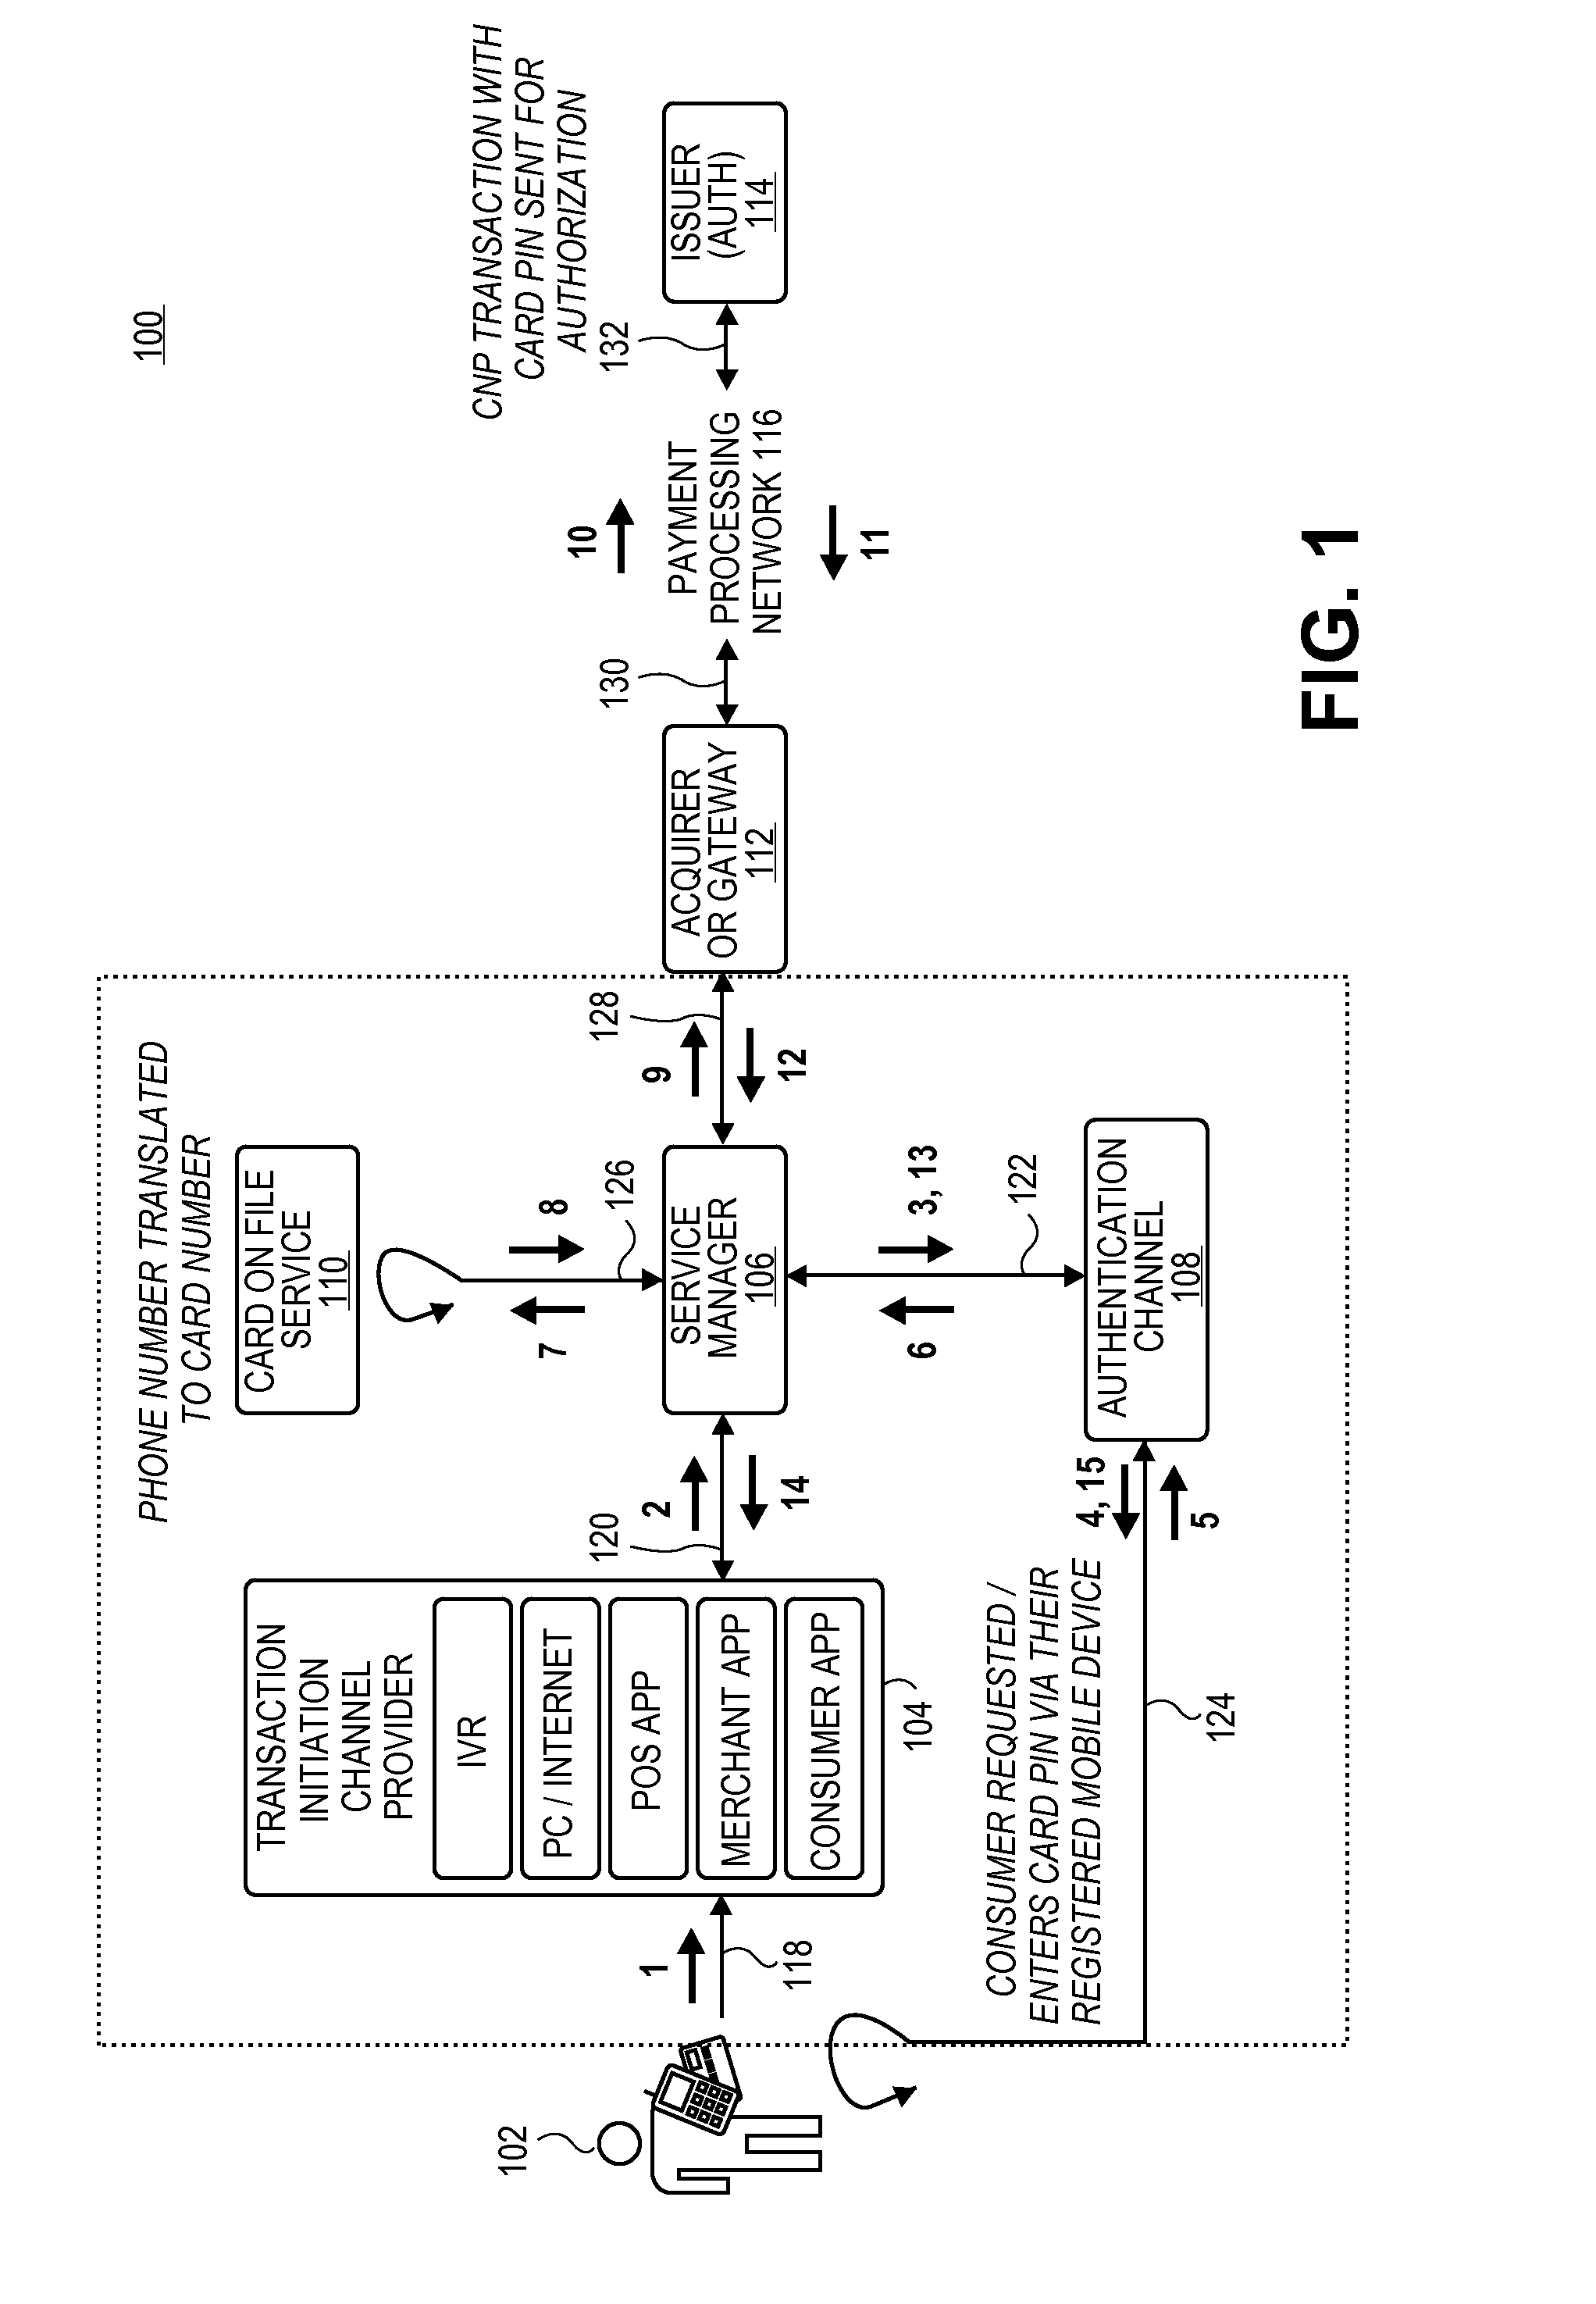 Authenticating Remote Transactions Using a Mobile Device